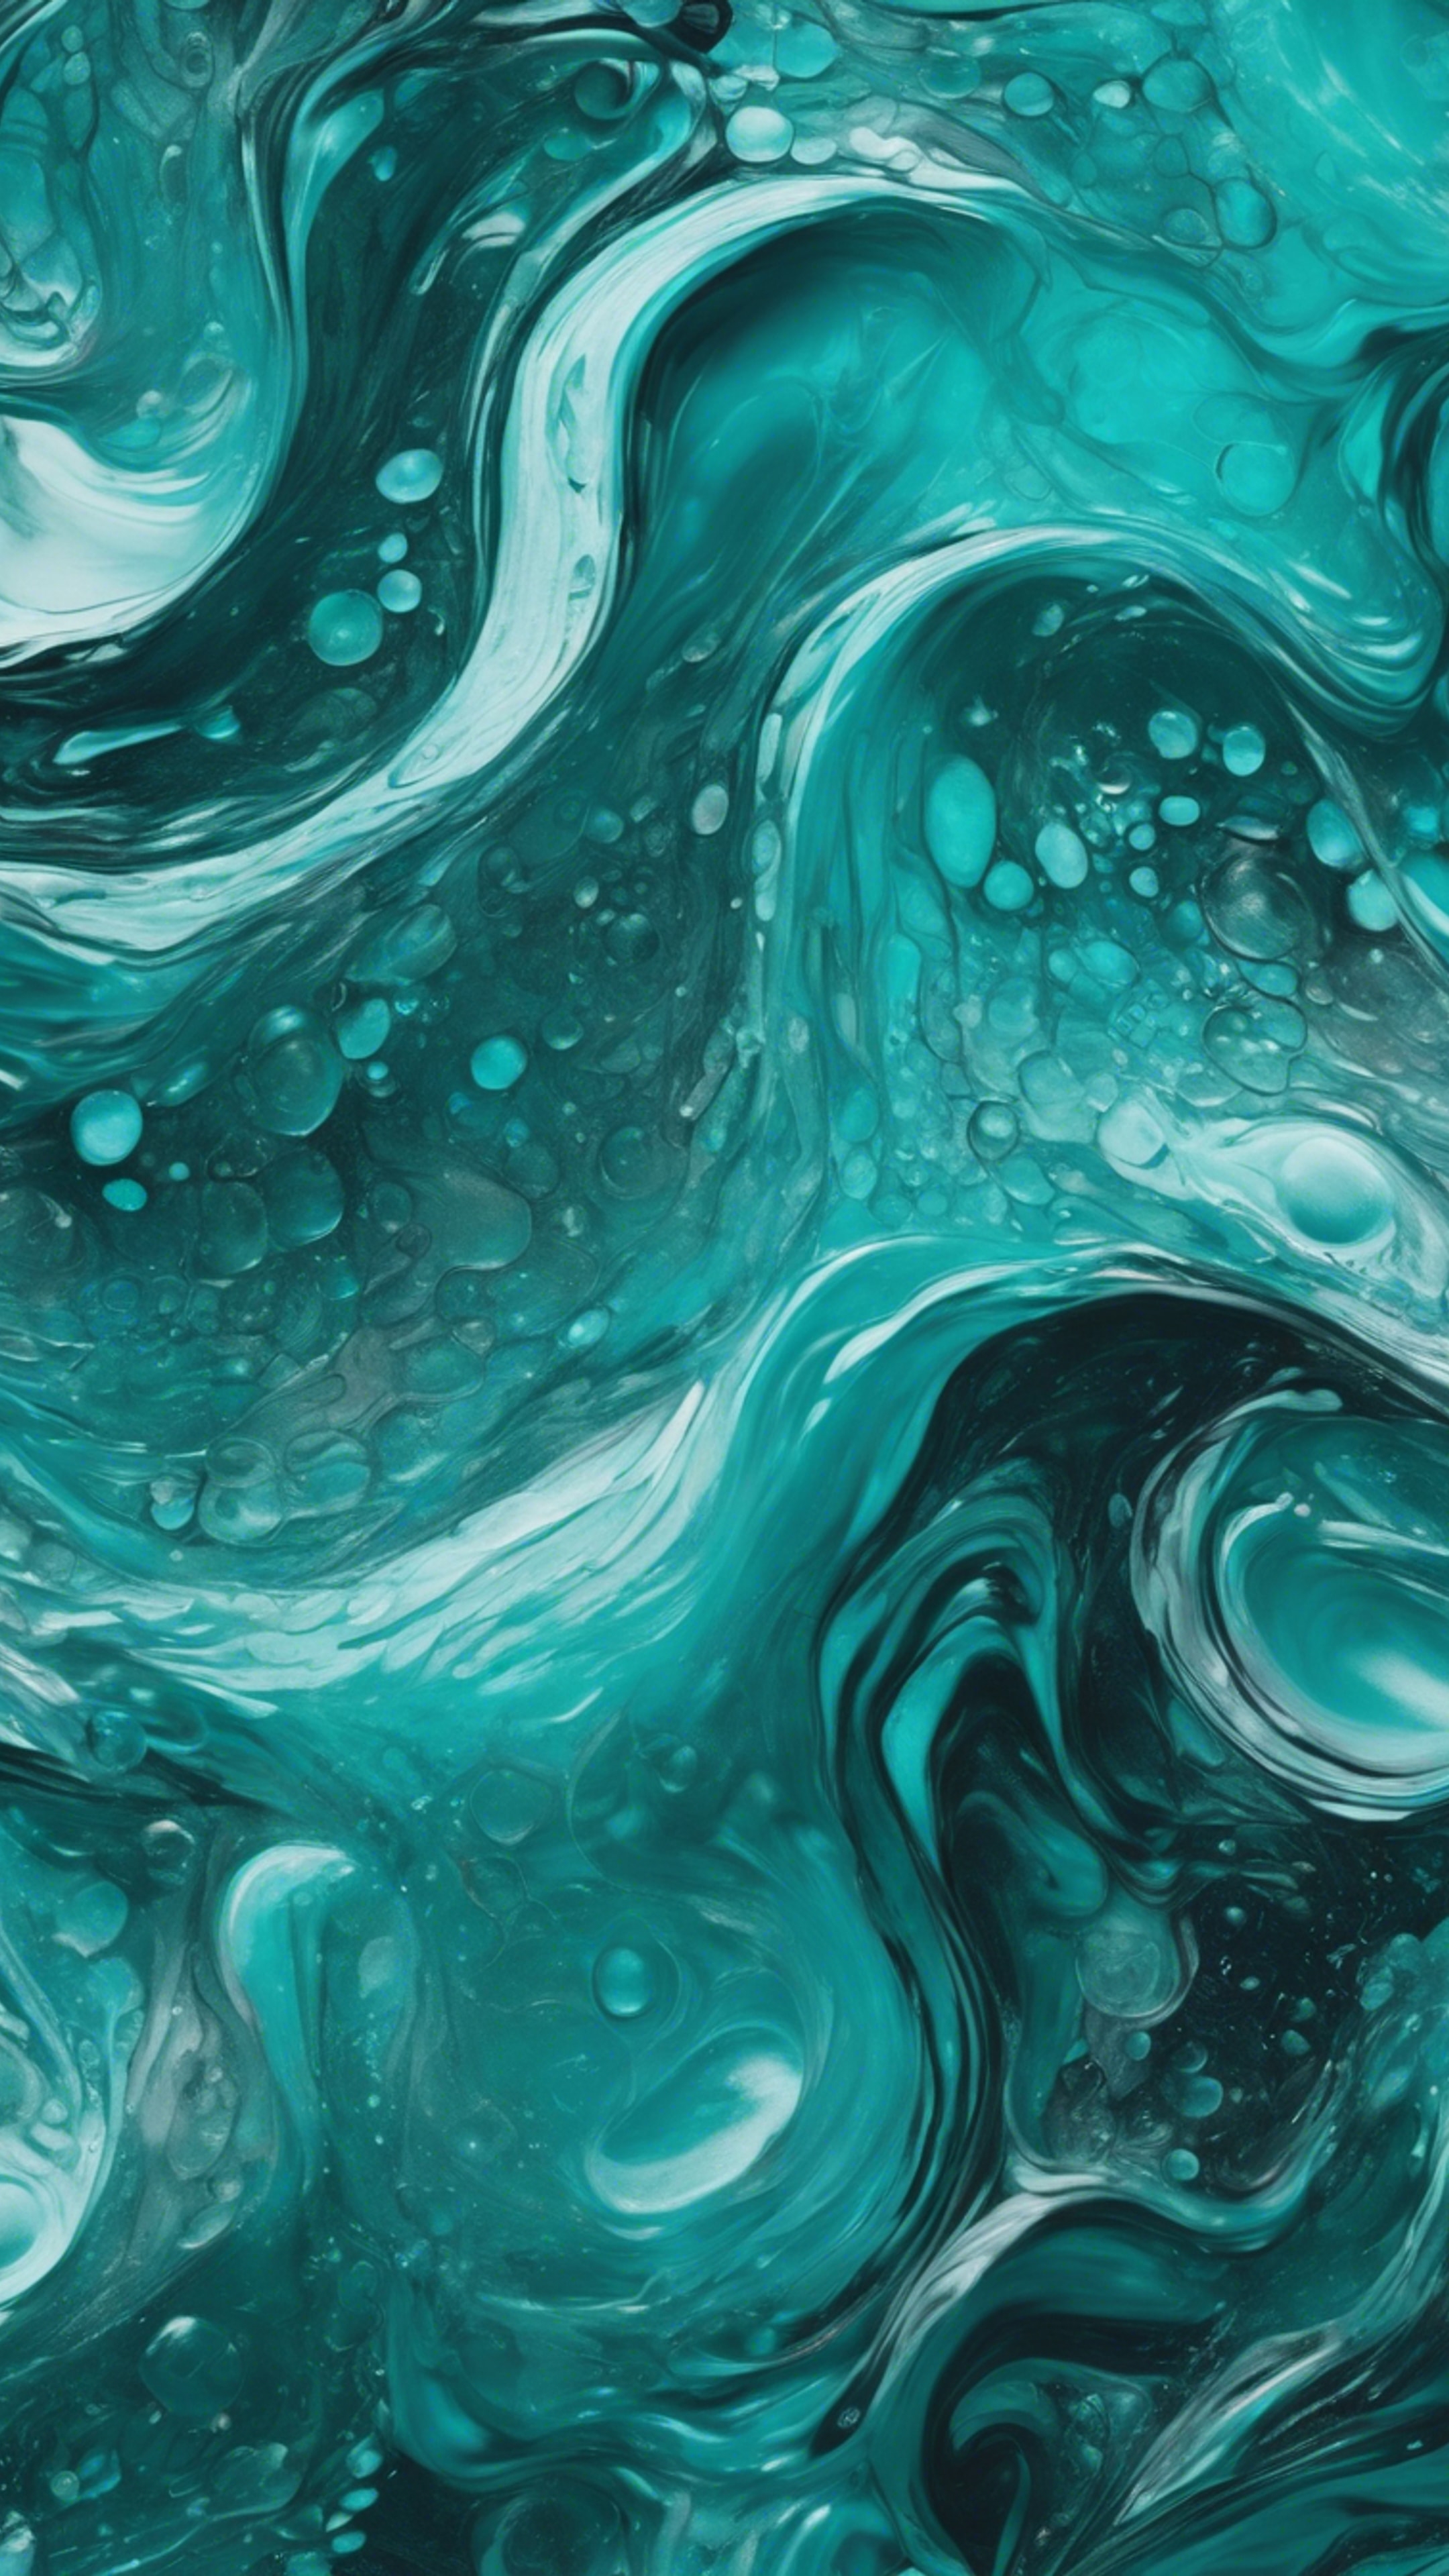 Abstract painting with swirling waves of shades of cool teal. 牆紙[053c1b1ade8044ef8a45]